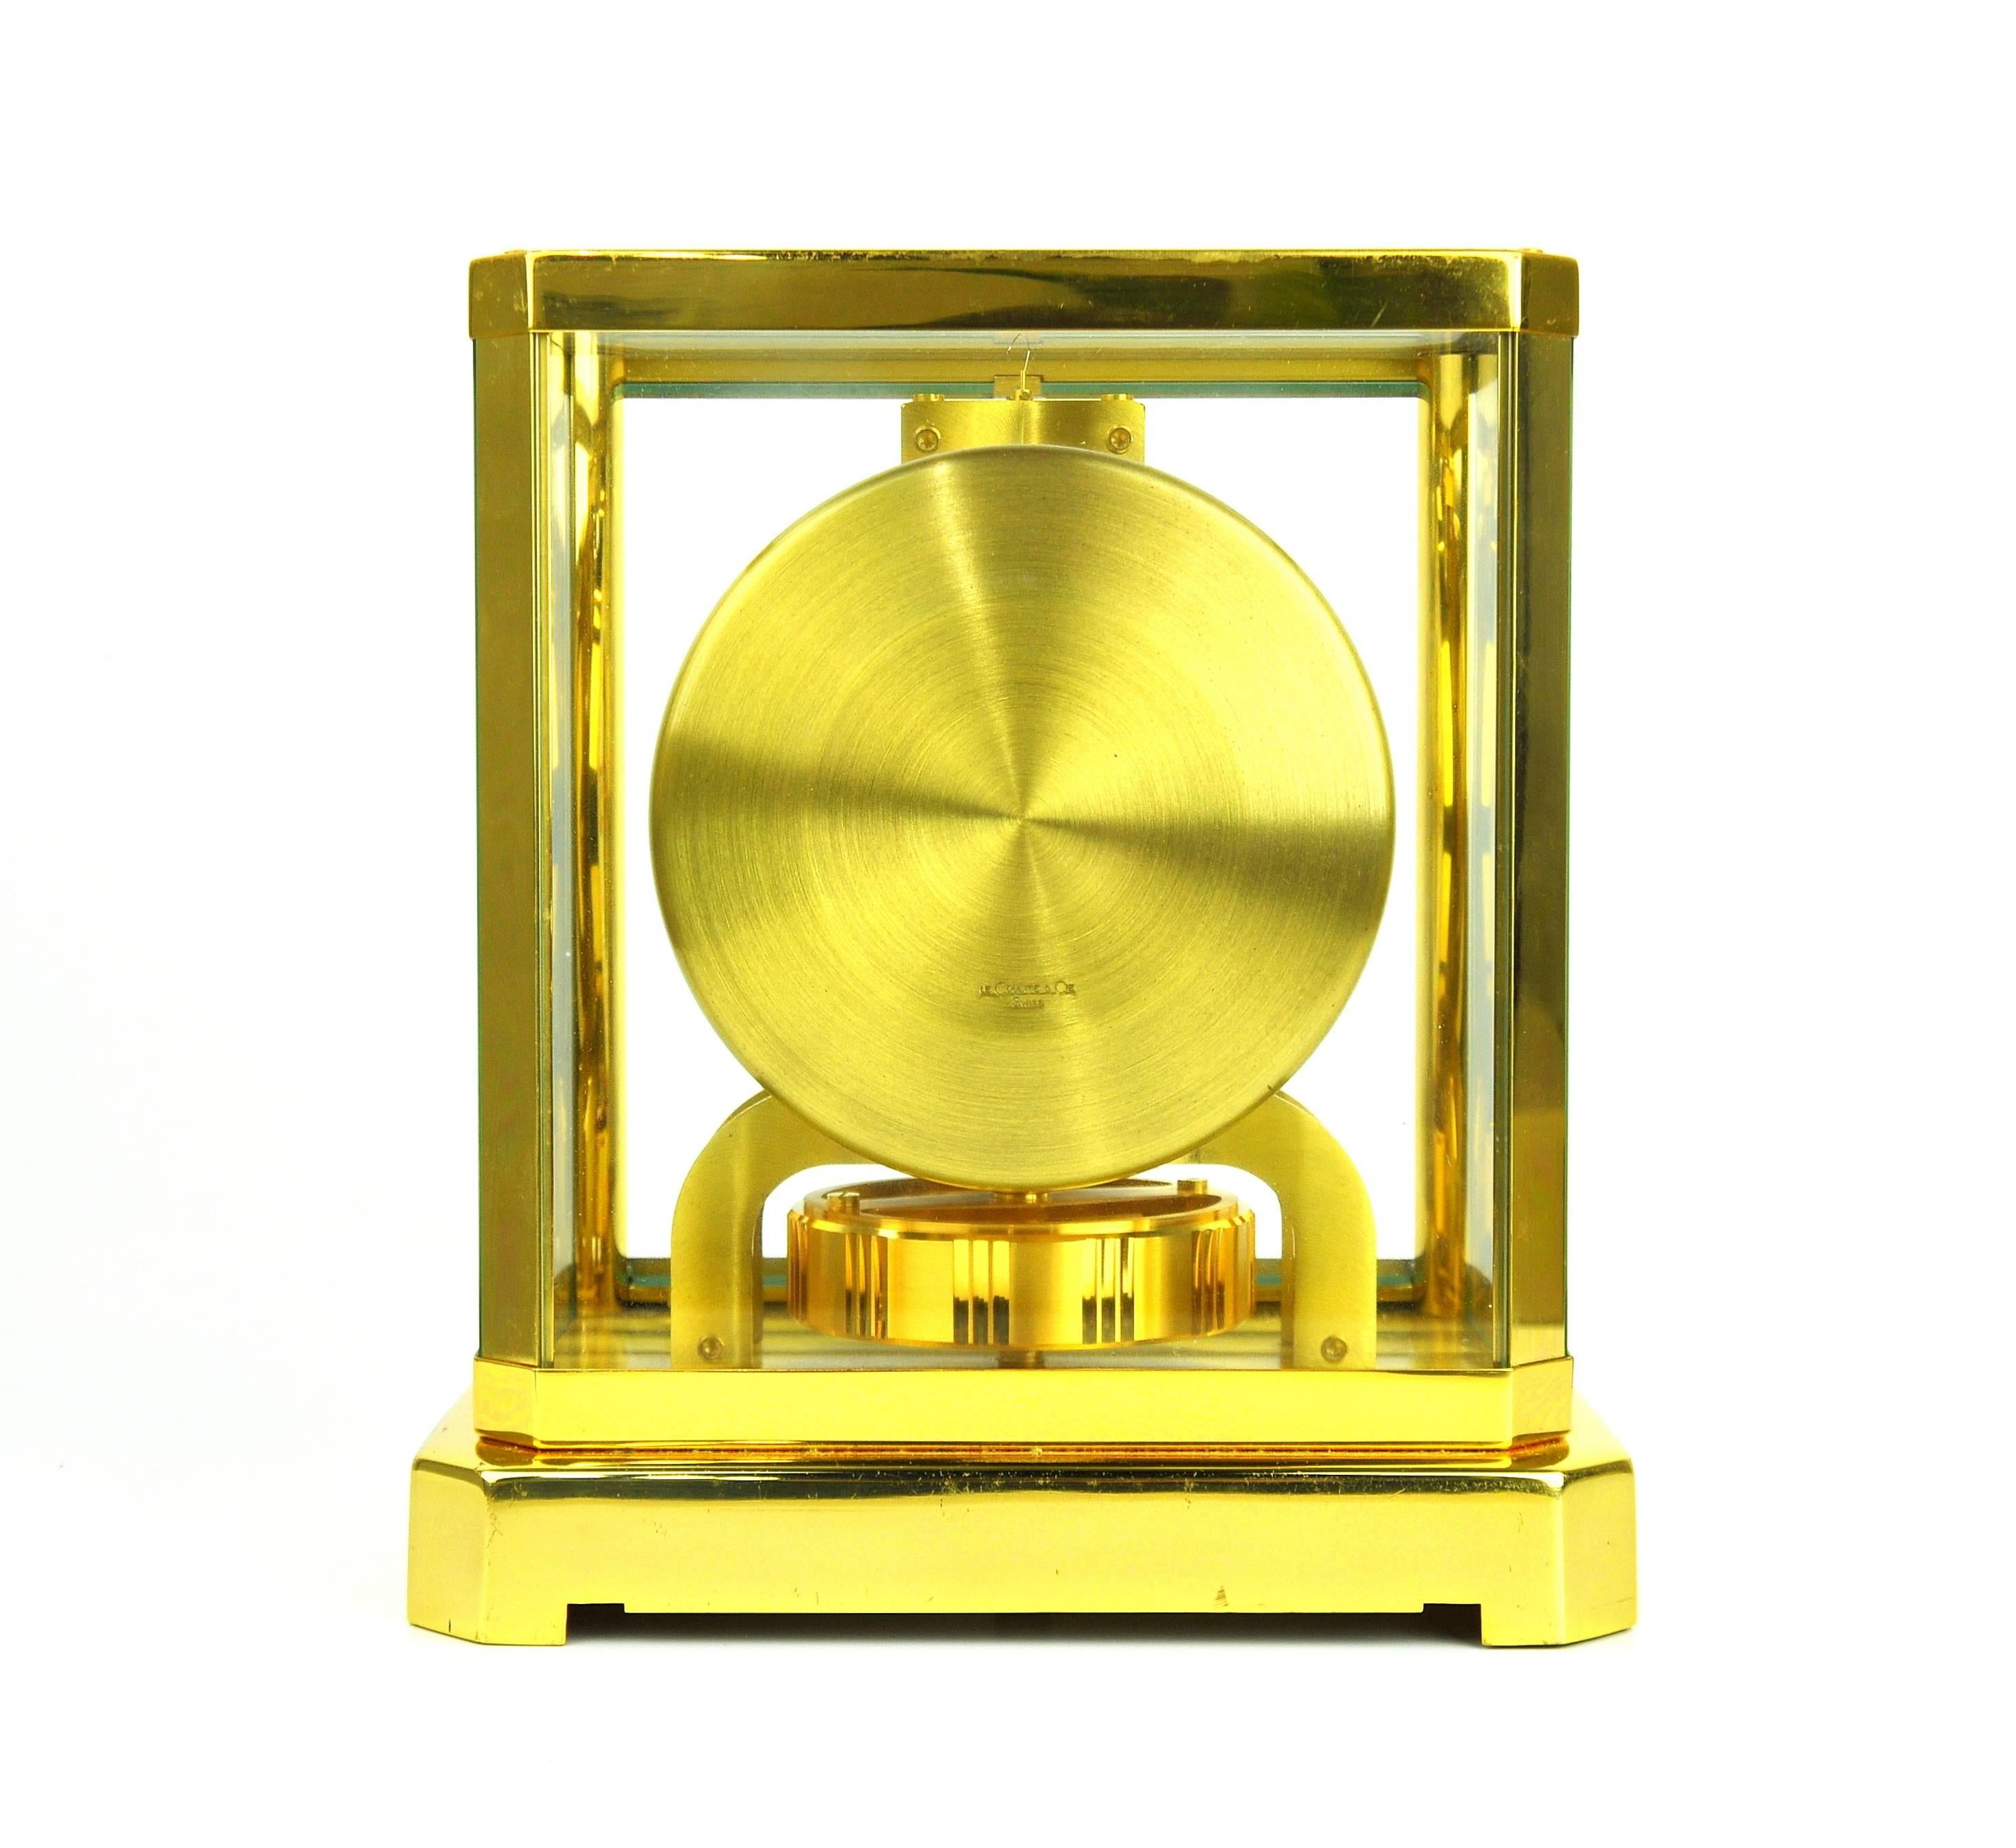 This perpetual motion Jaeger-LeCoultre mantle clock has a white dial, gold-toned Arabic numerals, hour markers and hands, and a gold-plated brass frame with clear glass windows. It does not need to be wound, as it gets the energy it needs to run